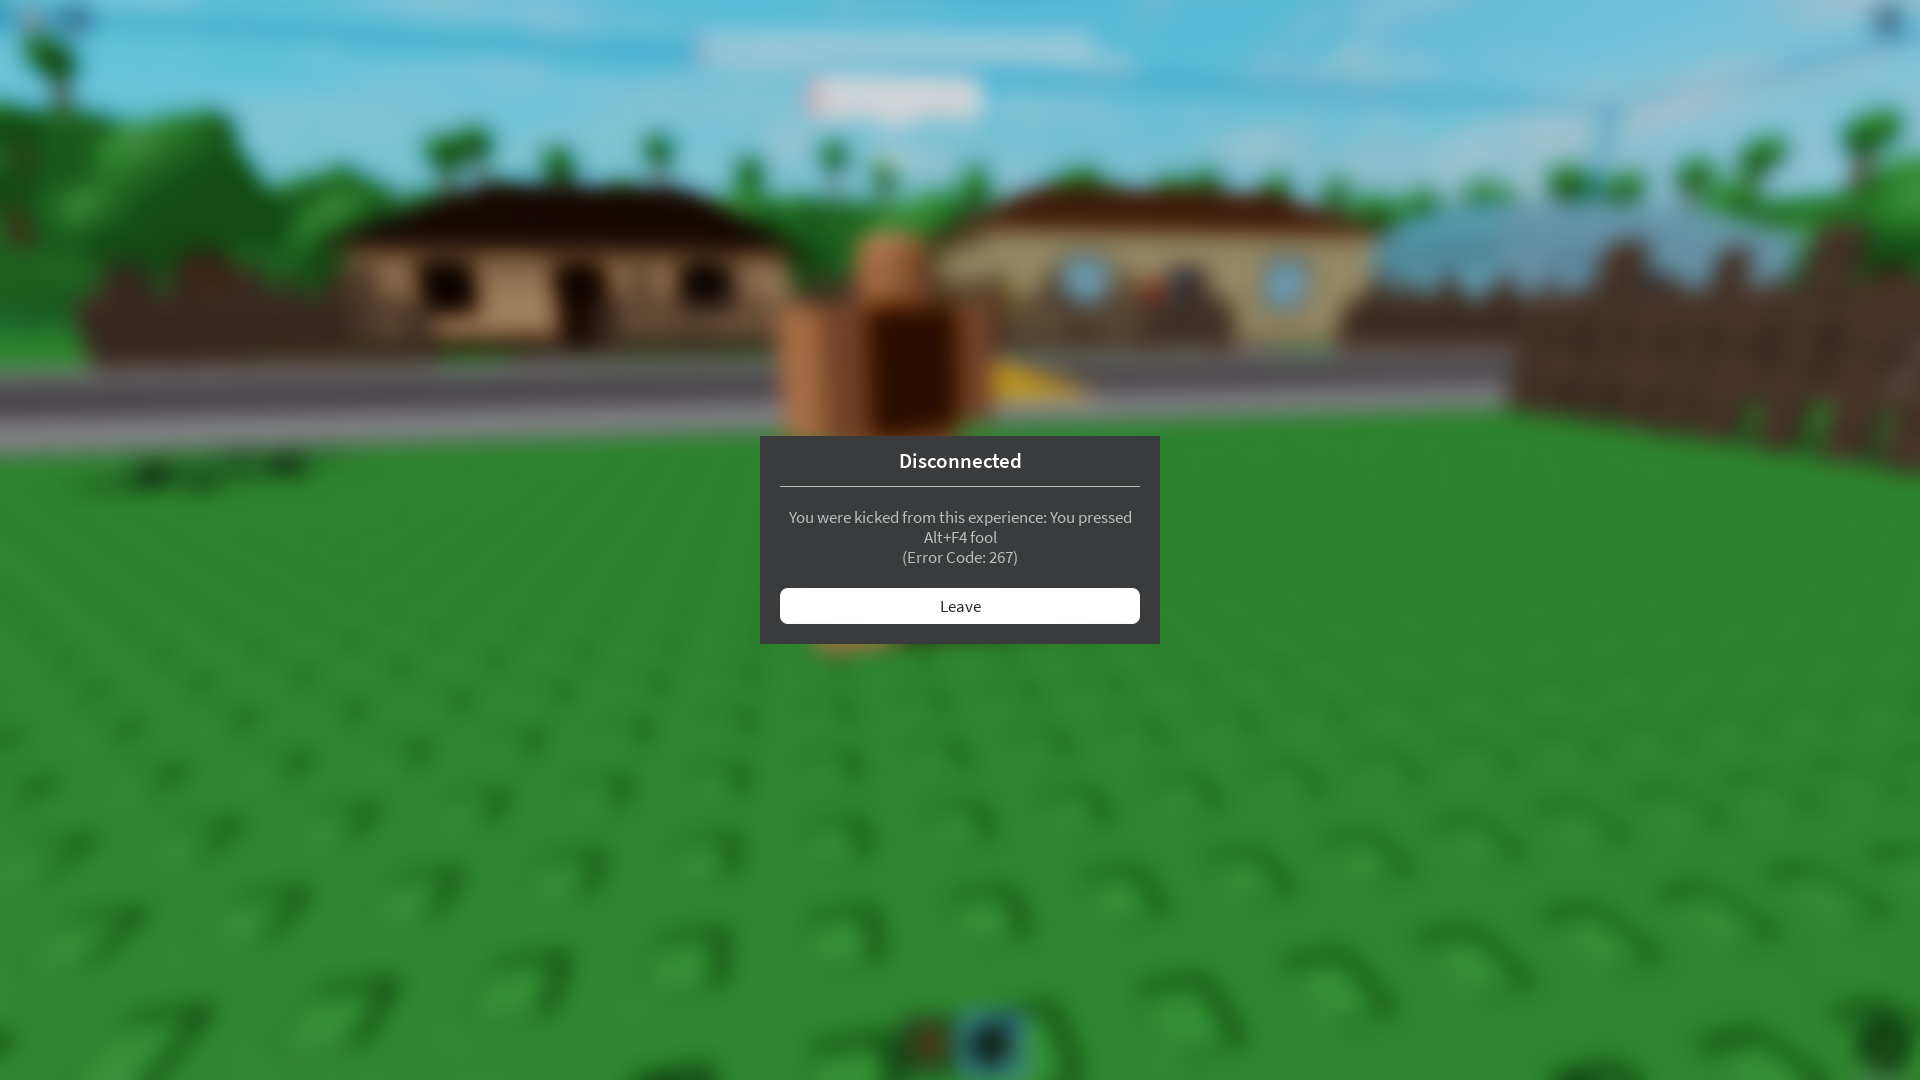 Is Roblox Actually ENDING On 1/1/23 